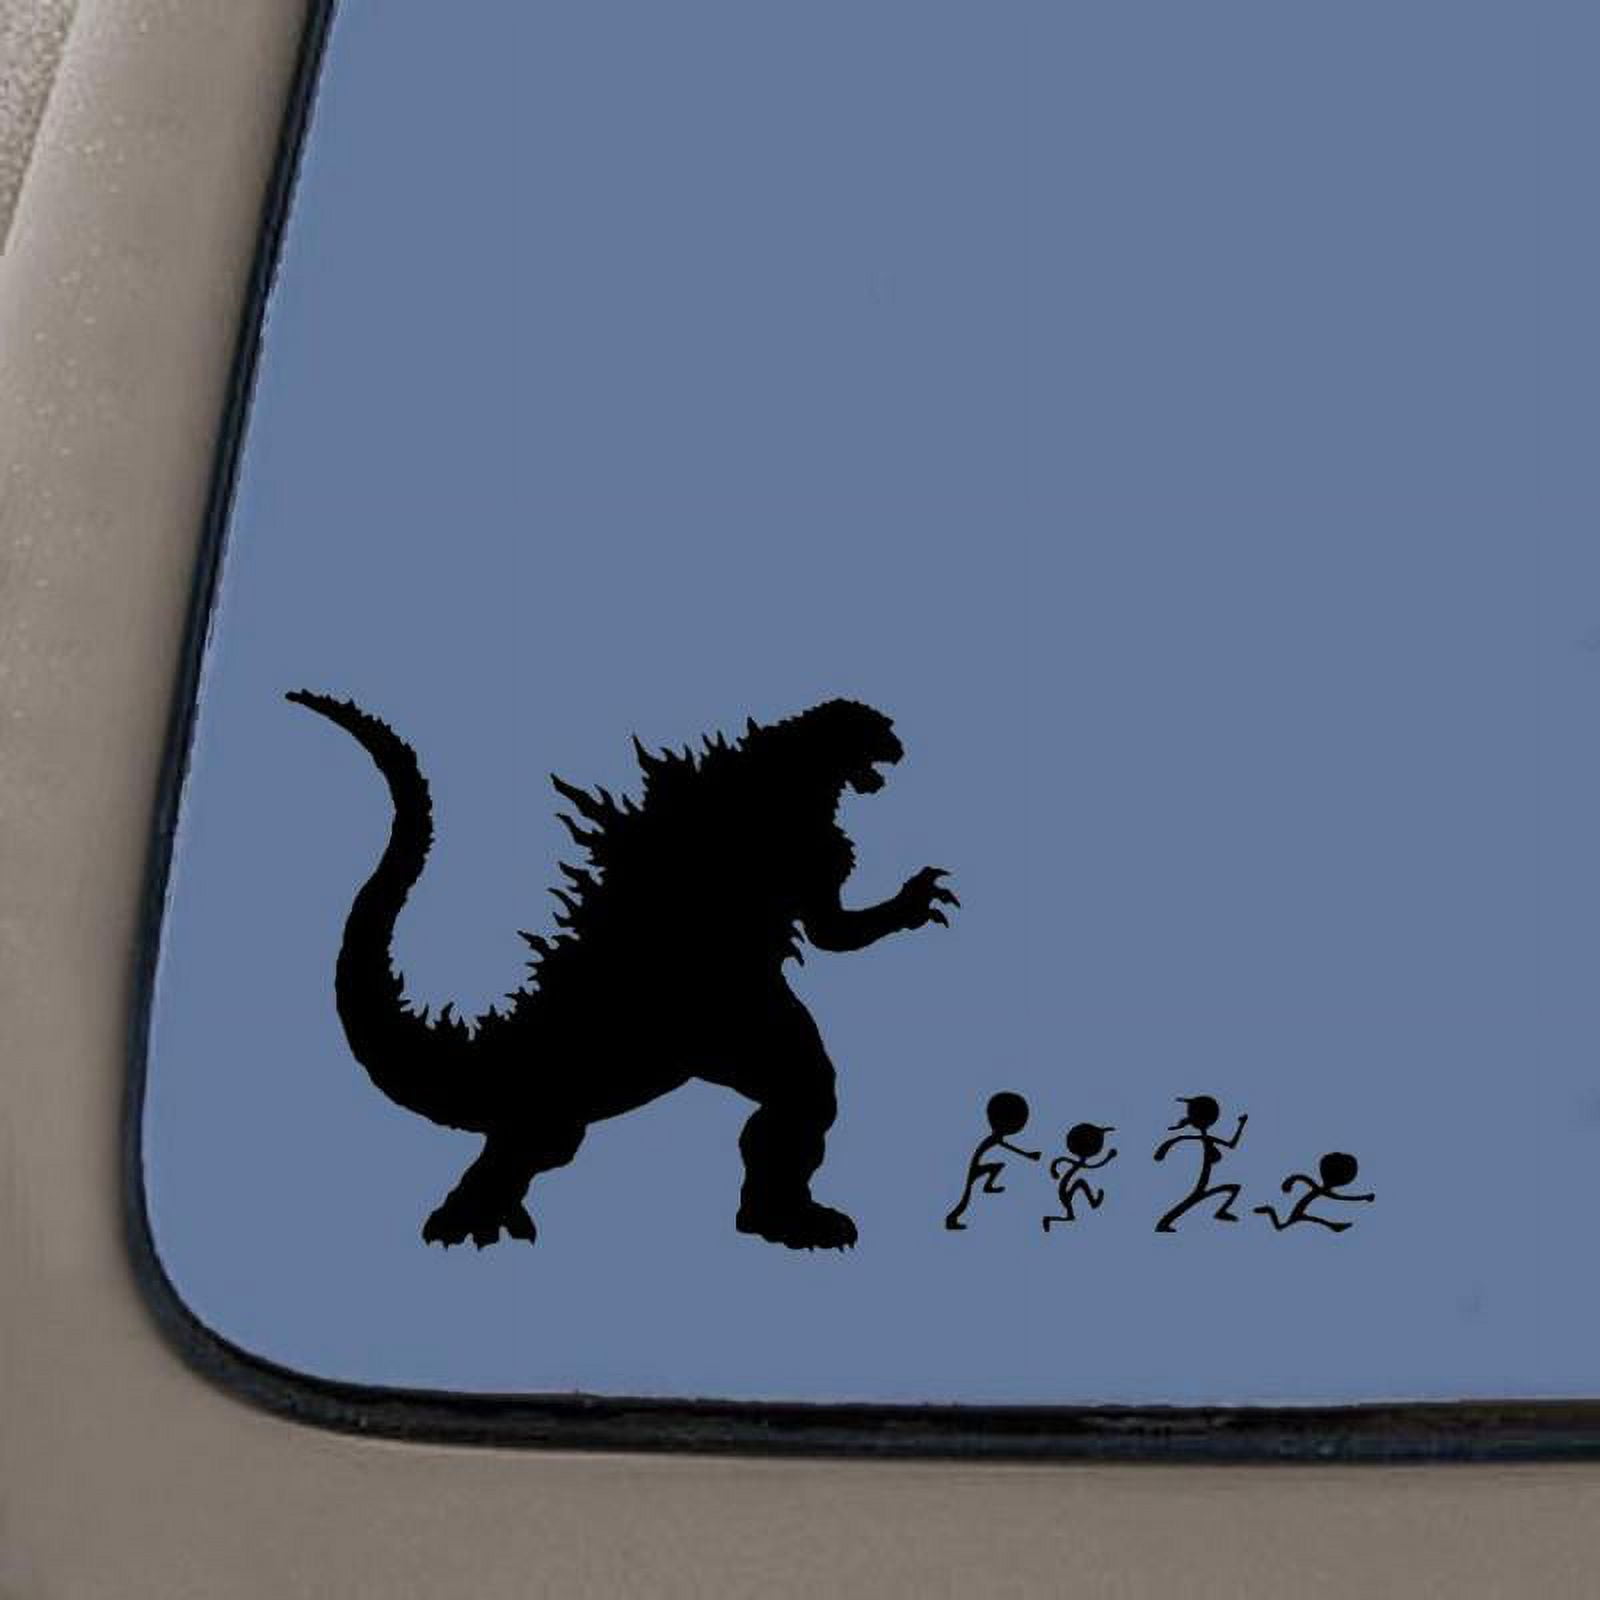 Godzilla In the Clouds 3-6 Vinyl Decal Stickers